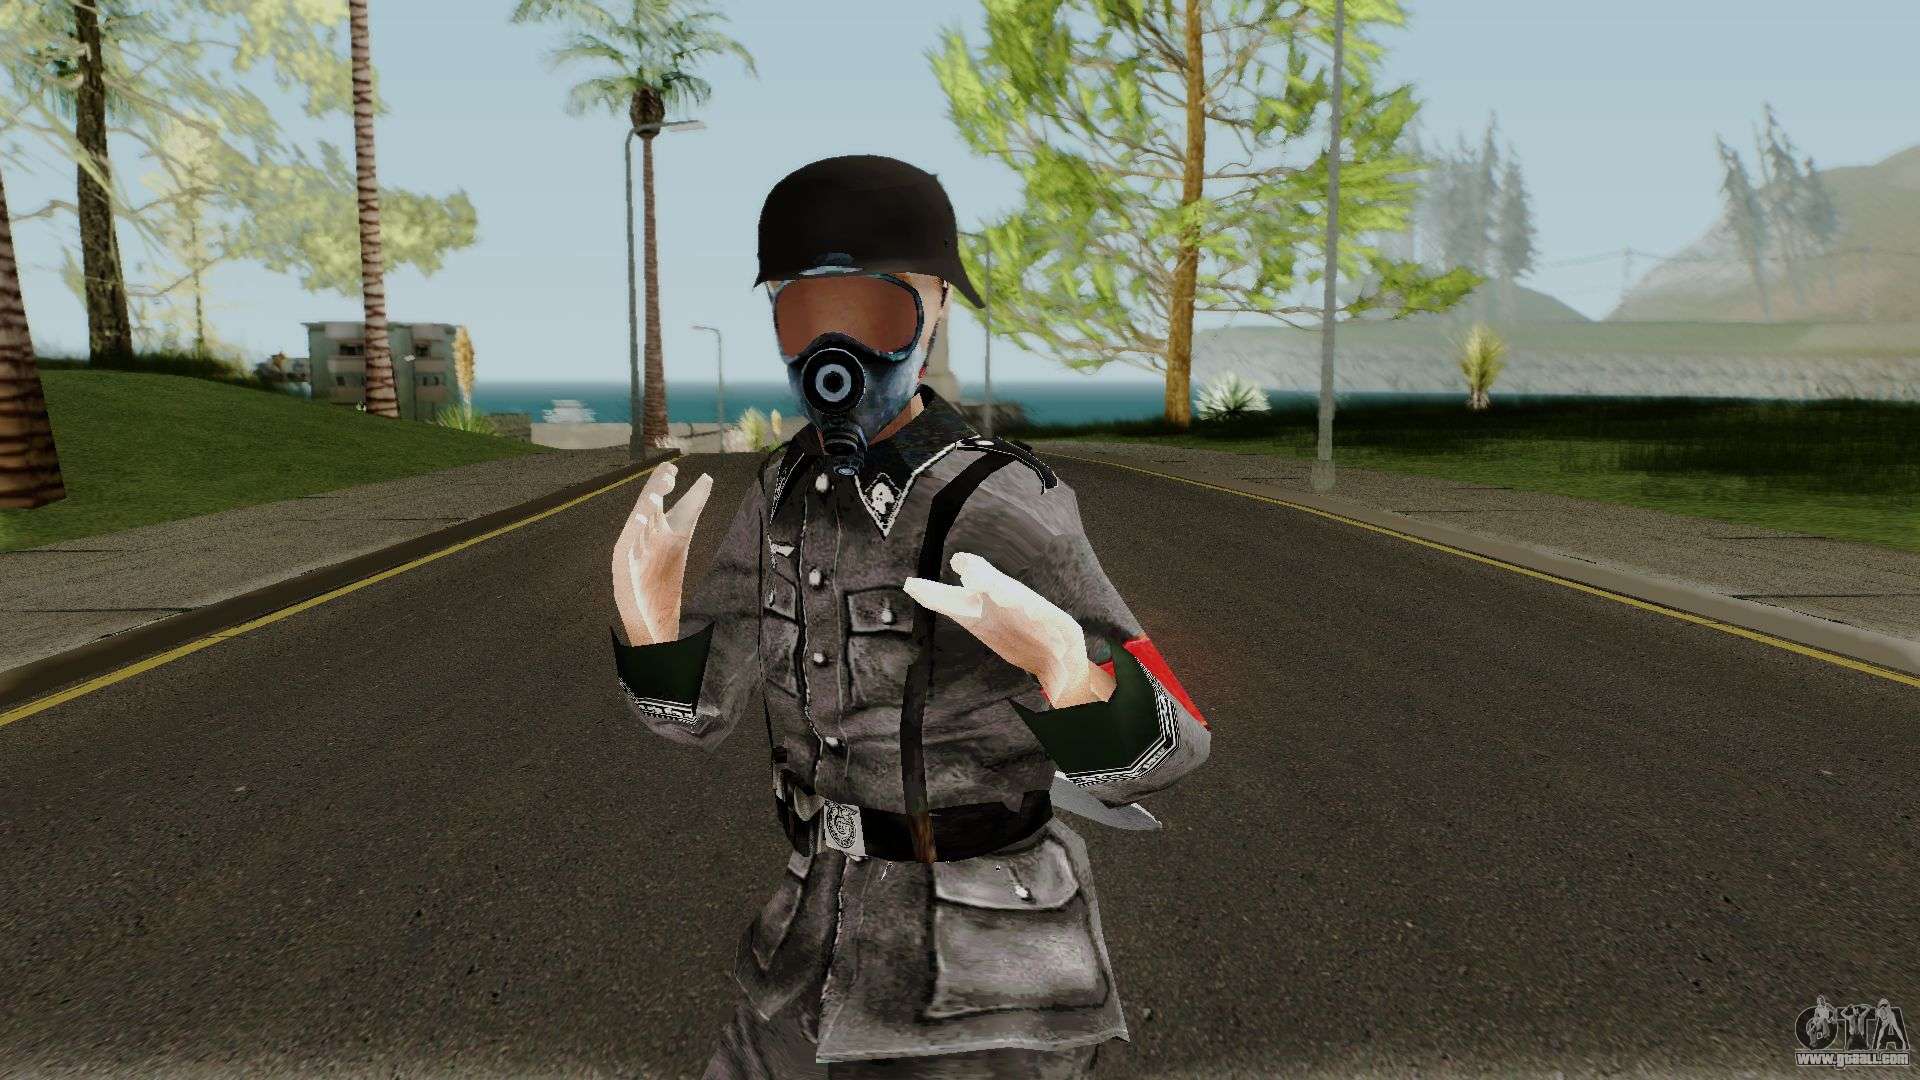 SS Nazi Skin with Gasmask for GTA San Andreas